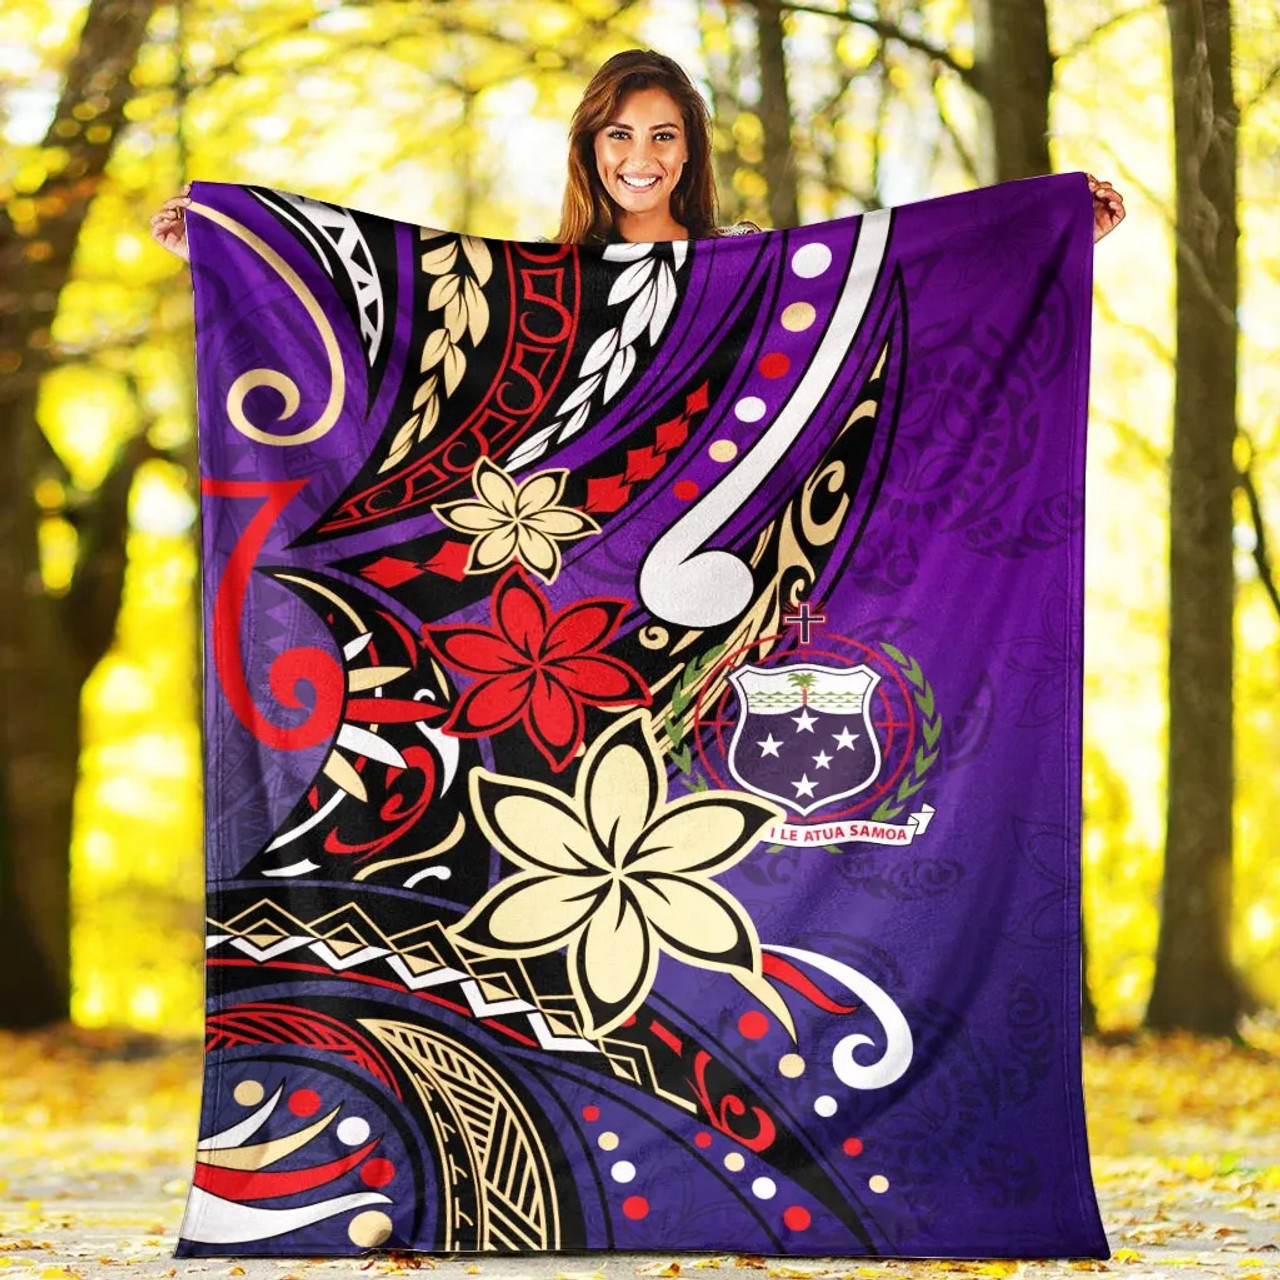 Samoa Premium Blanket - Tribal Flower With Special Turtles Purple Color 5